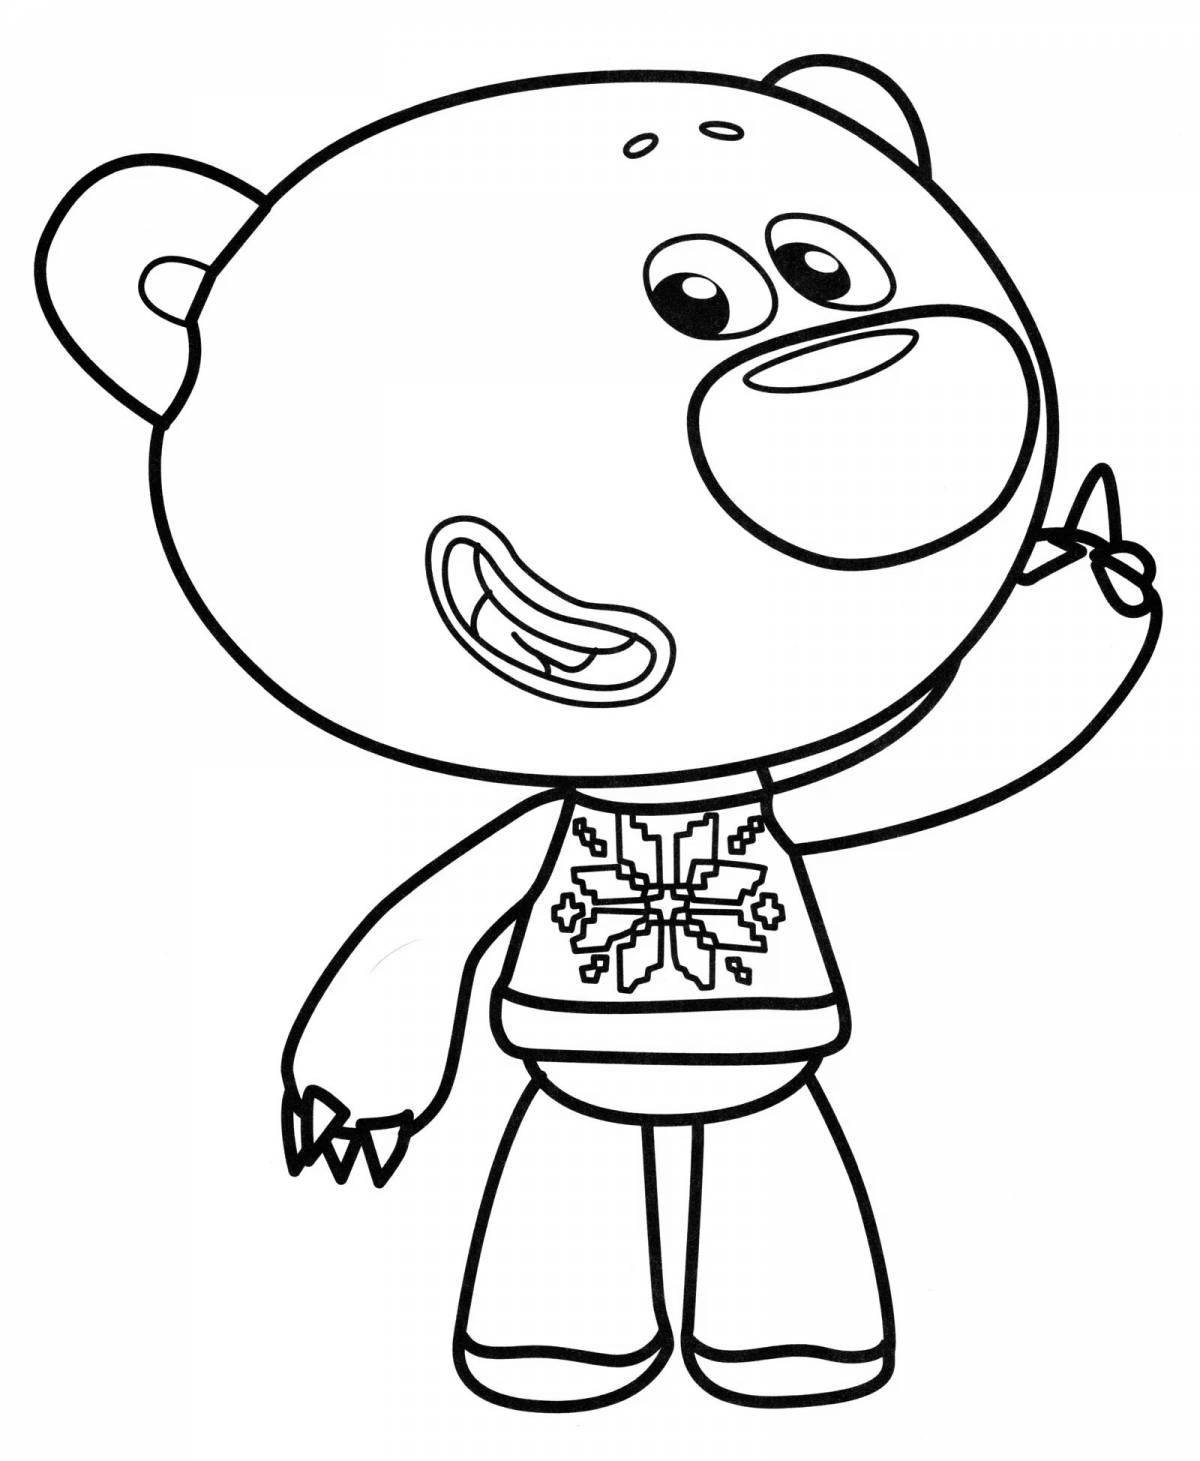 Fun coloring pages for android